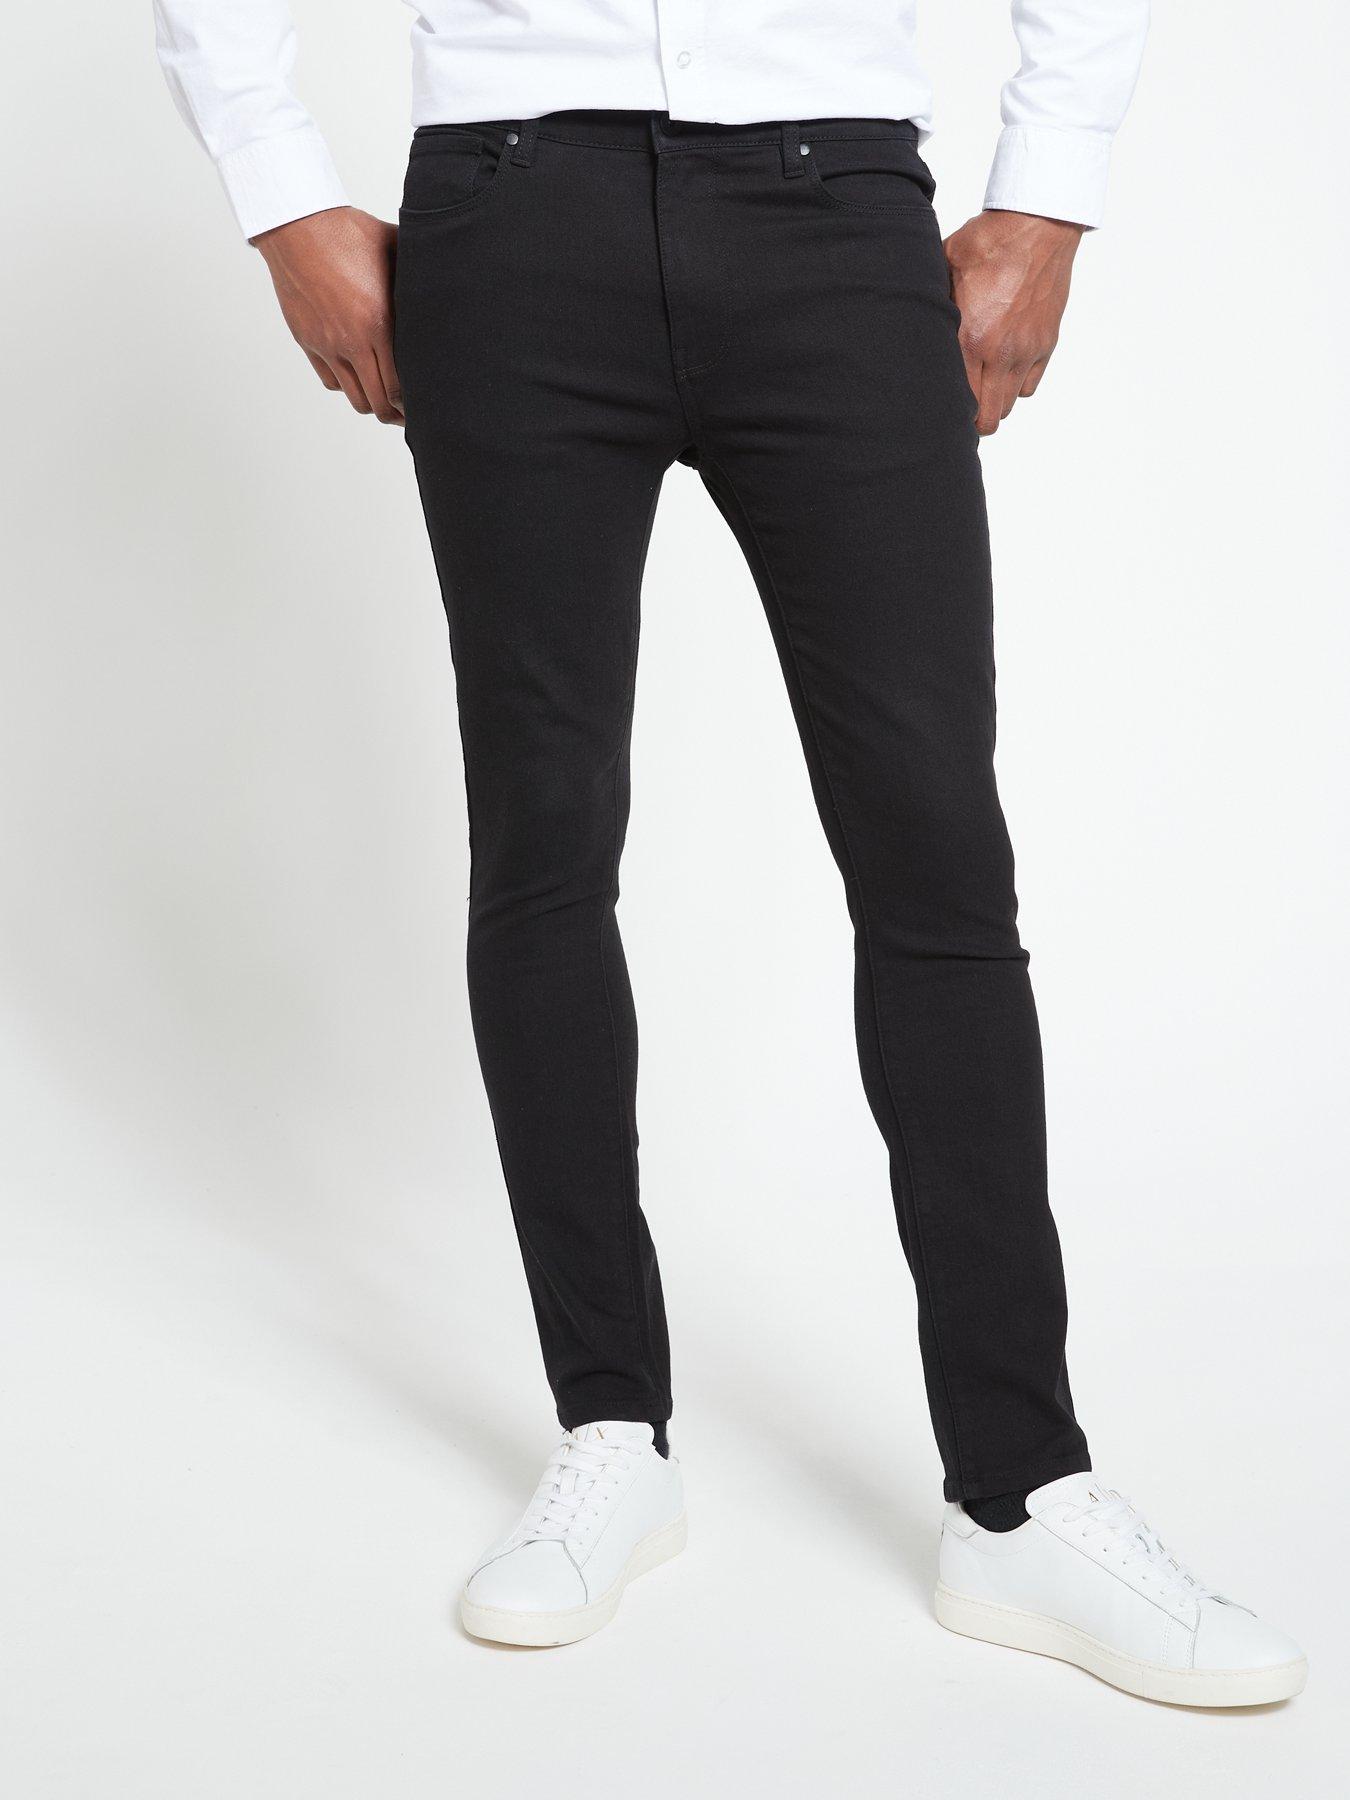 Up To 72% Off on Men's Super Stretch Slim Fit